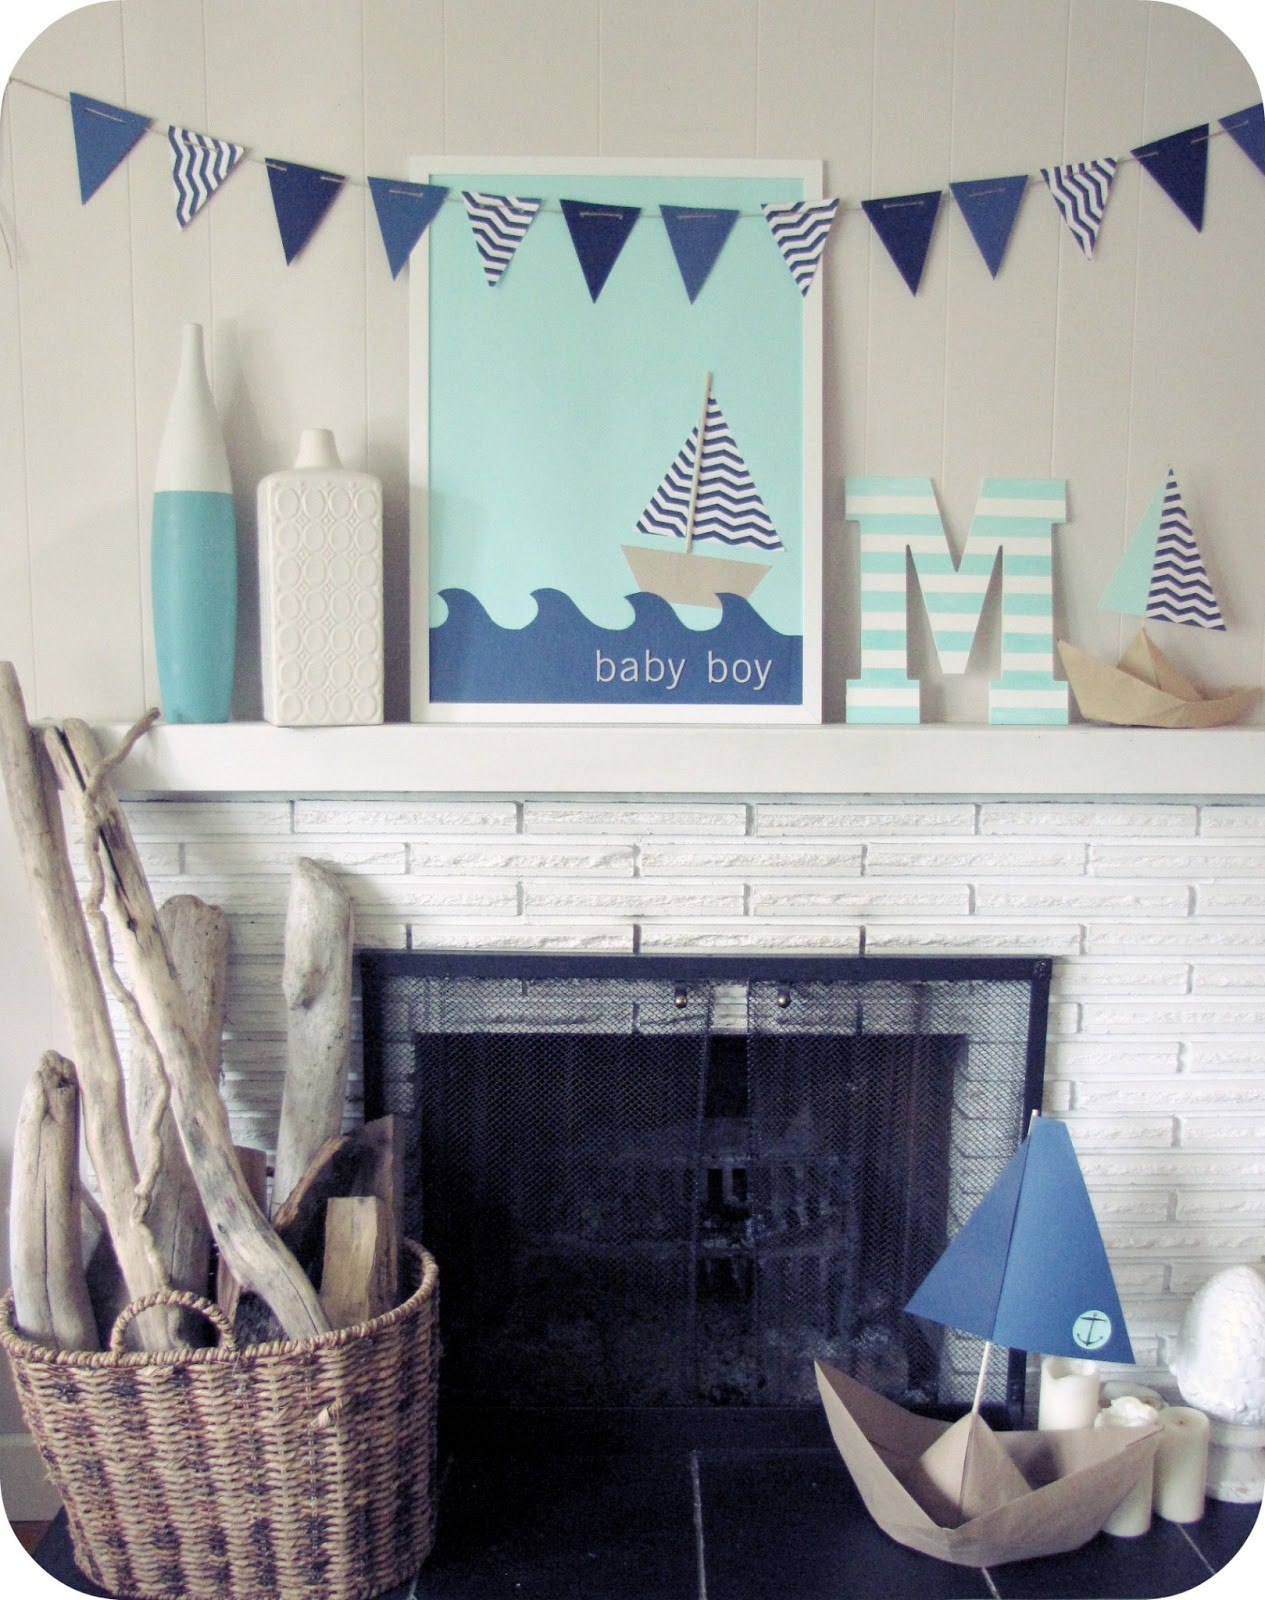 Nautical Decor Baby Shower
 My House of Giggles A Nautical Baby Boy Shower for Malcolm